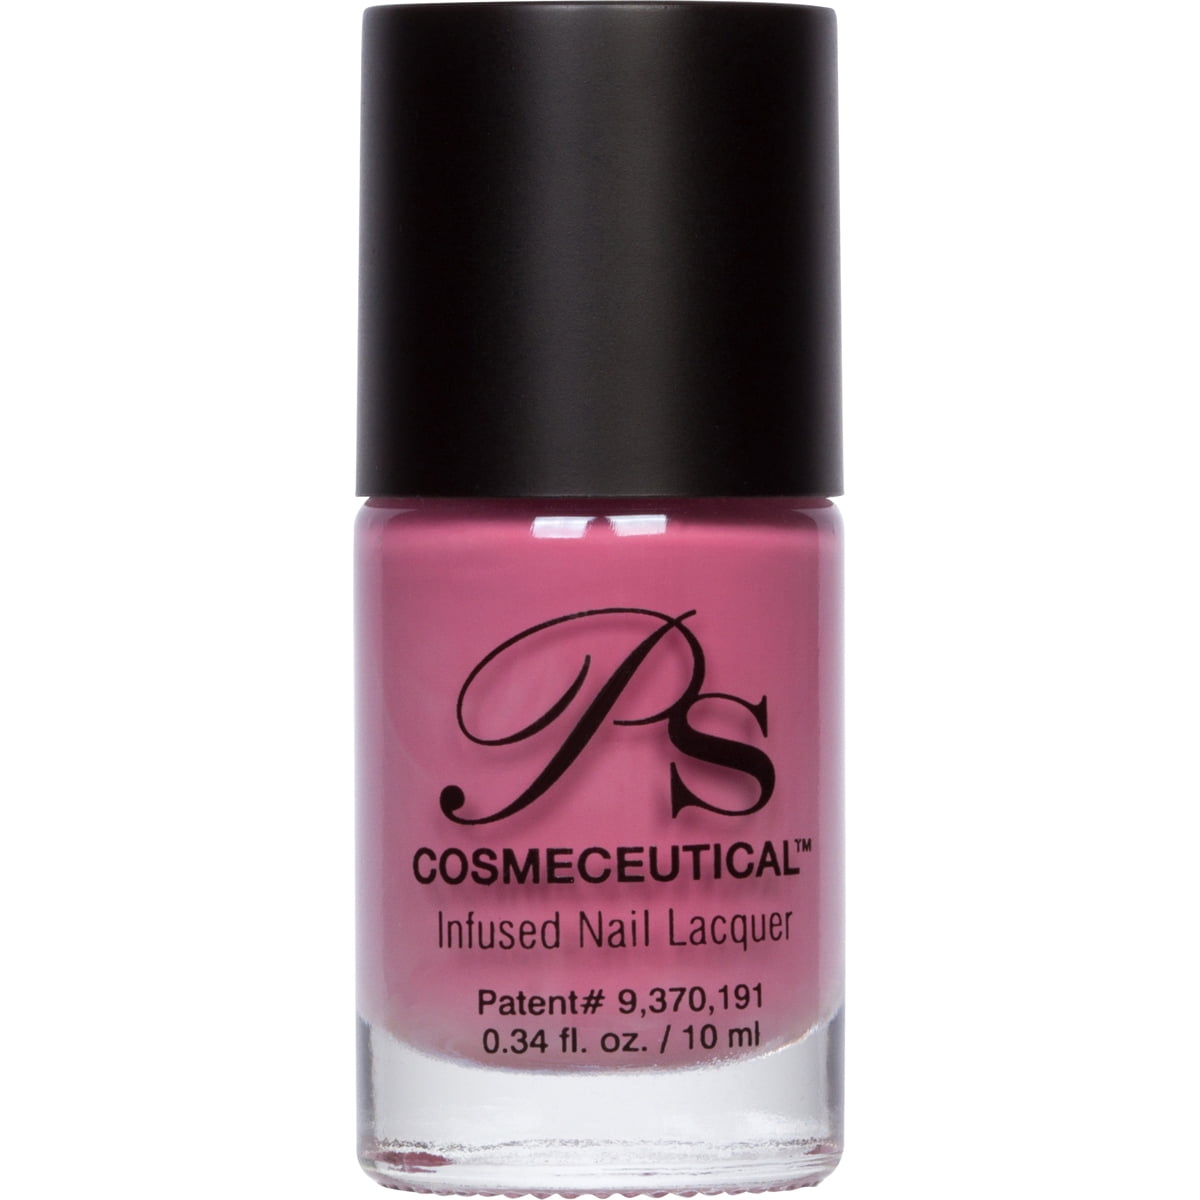 Batrafen Nail Lacquer: Fight Fungal Nail Infections with Proven Result